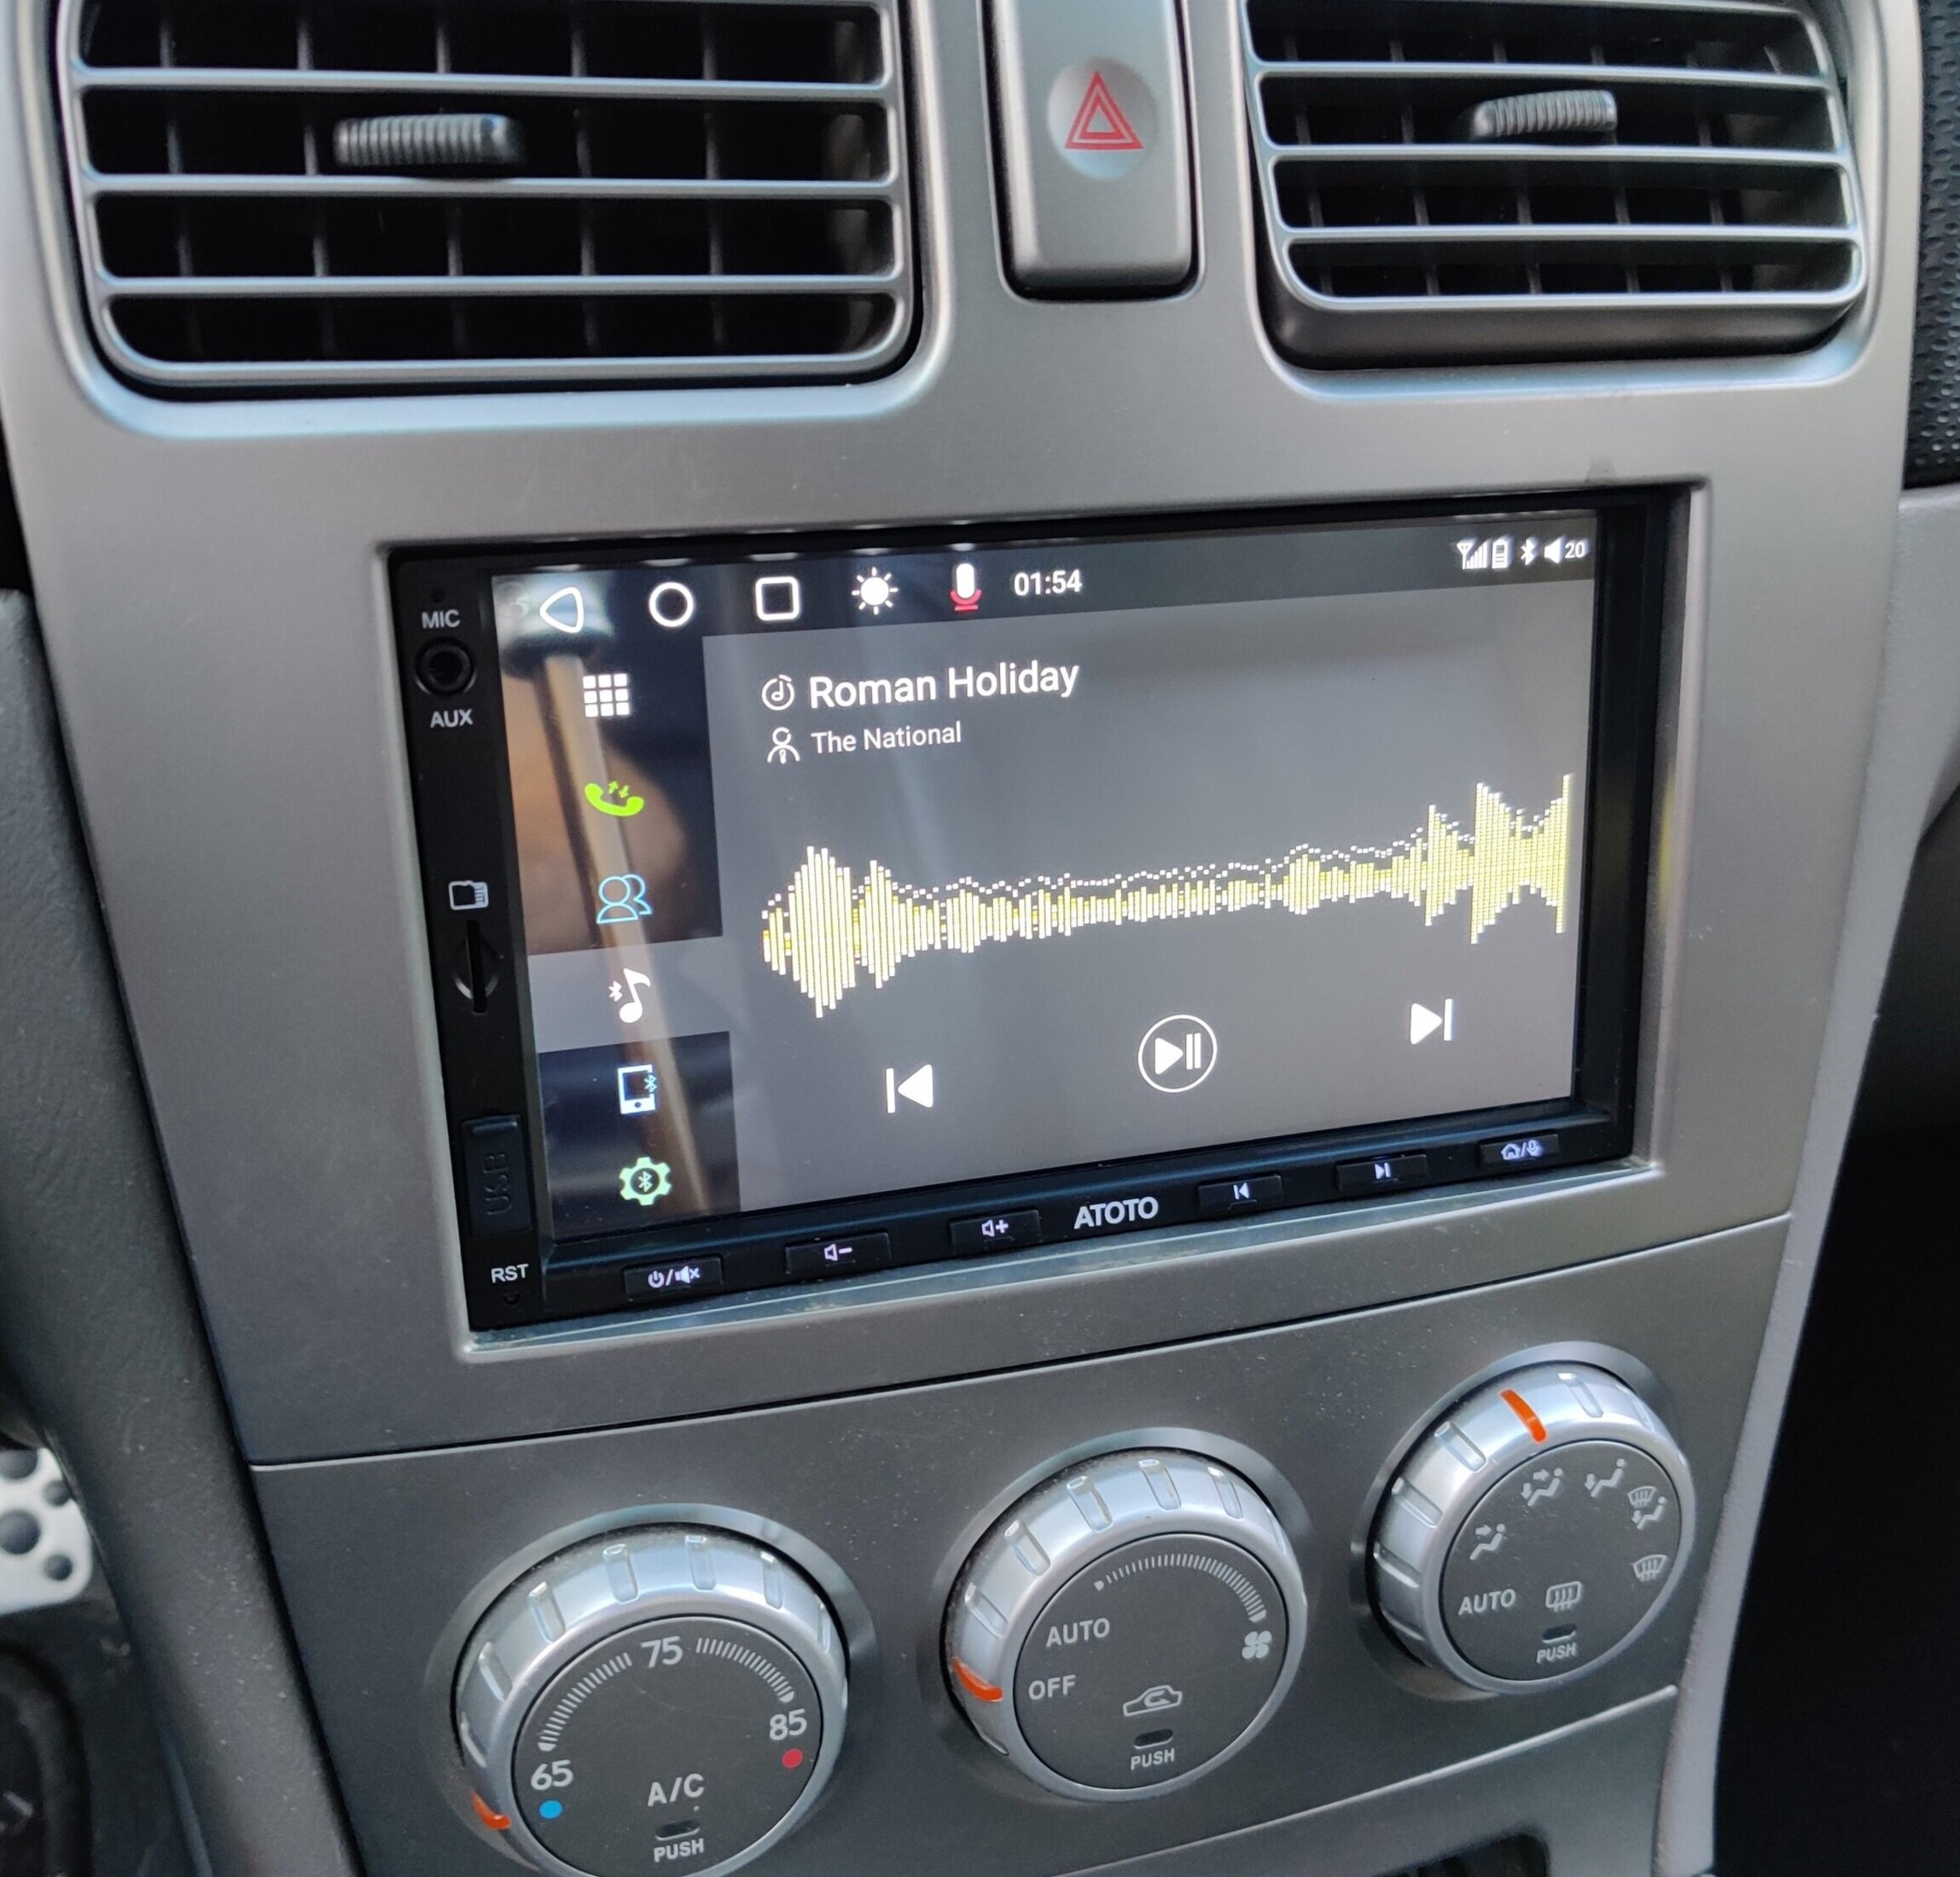 Atoto S8 Gen2 Standard Android head unit! Initial thoughts and